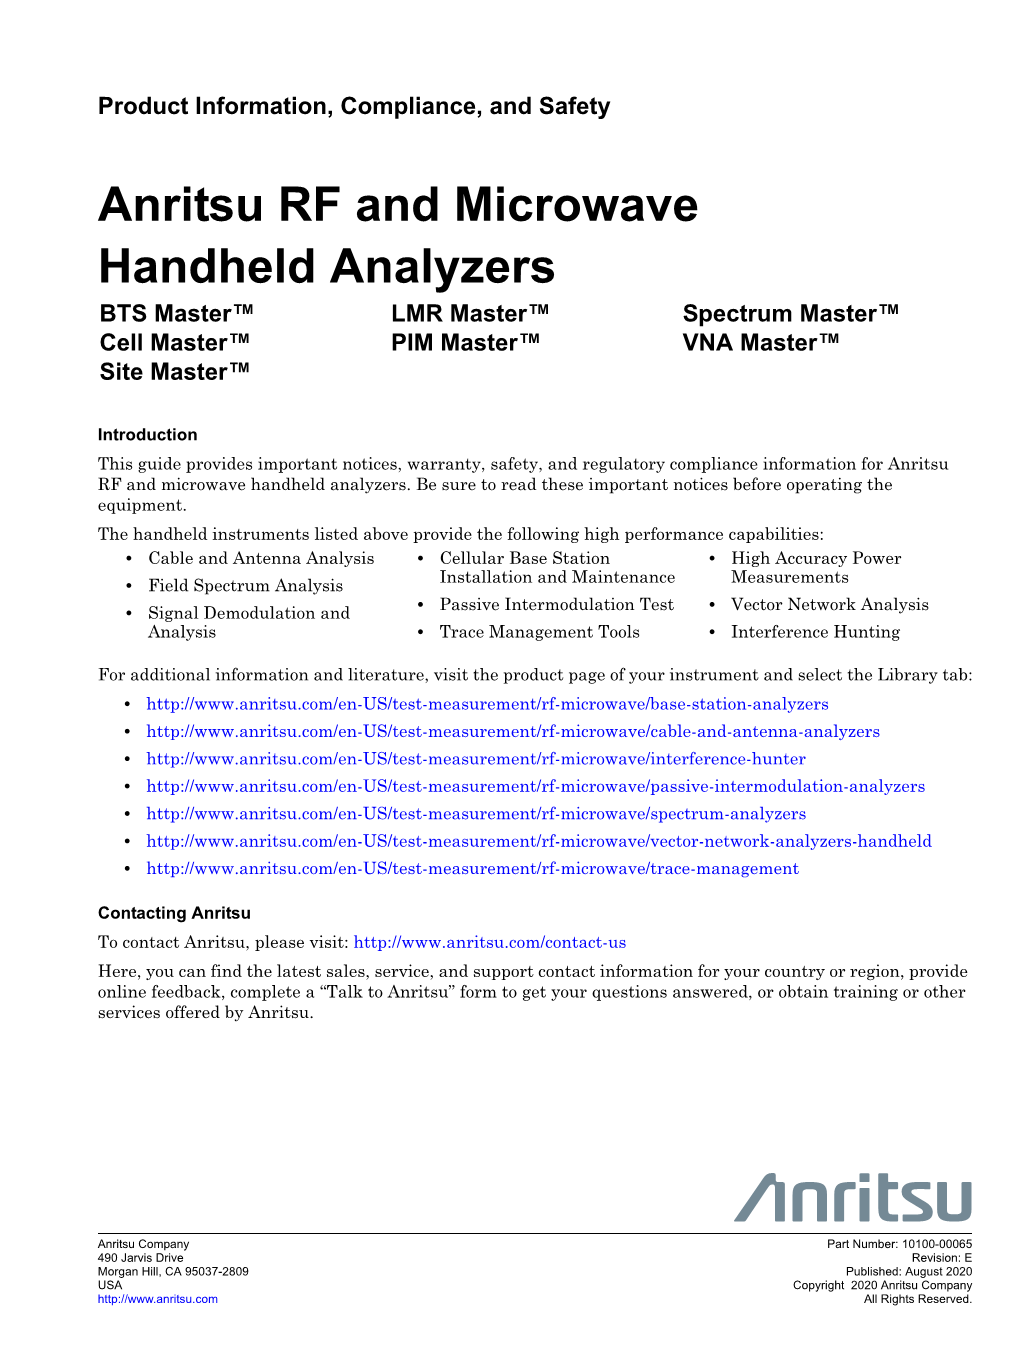 Anritsu RF and Microwave Handheld Analyzers Product Information Compliance and Safety